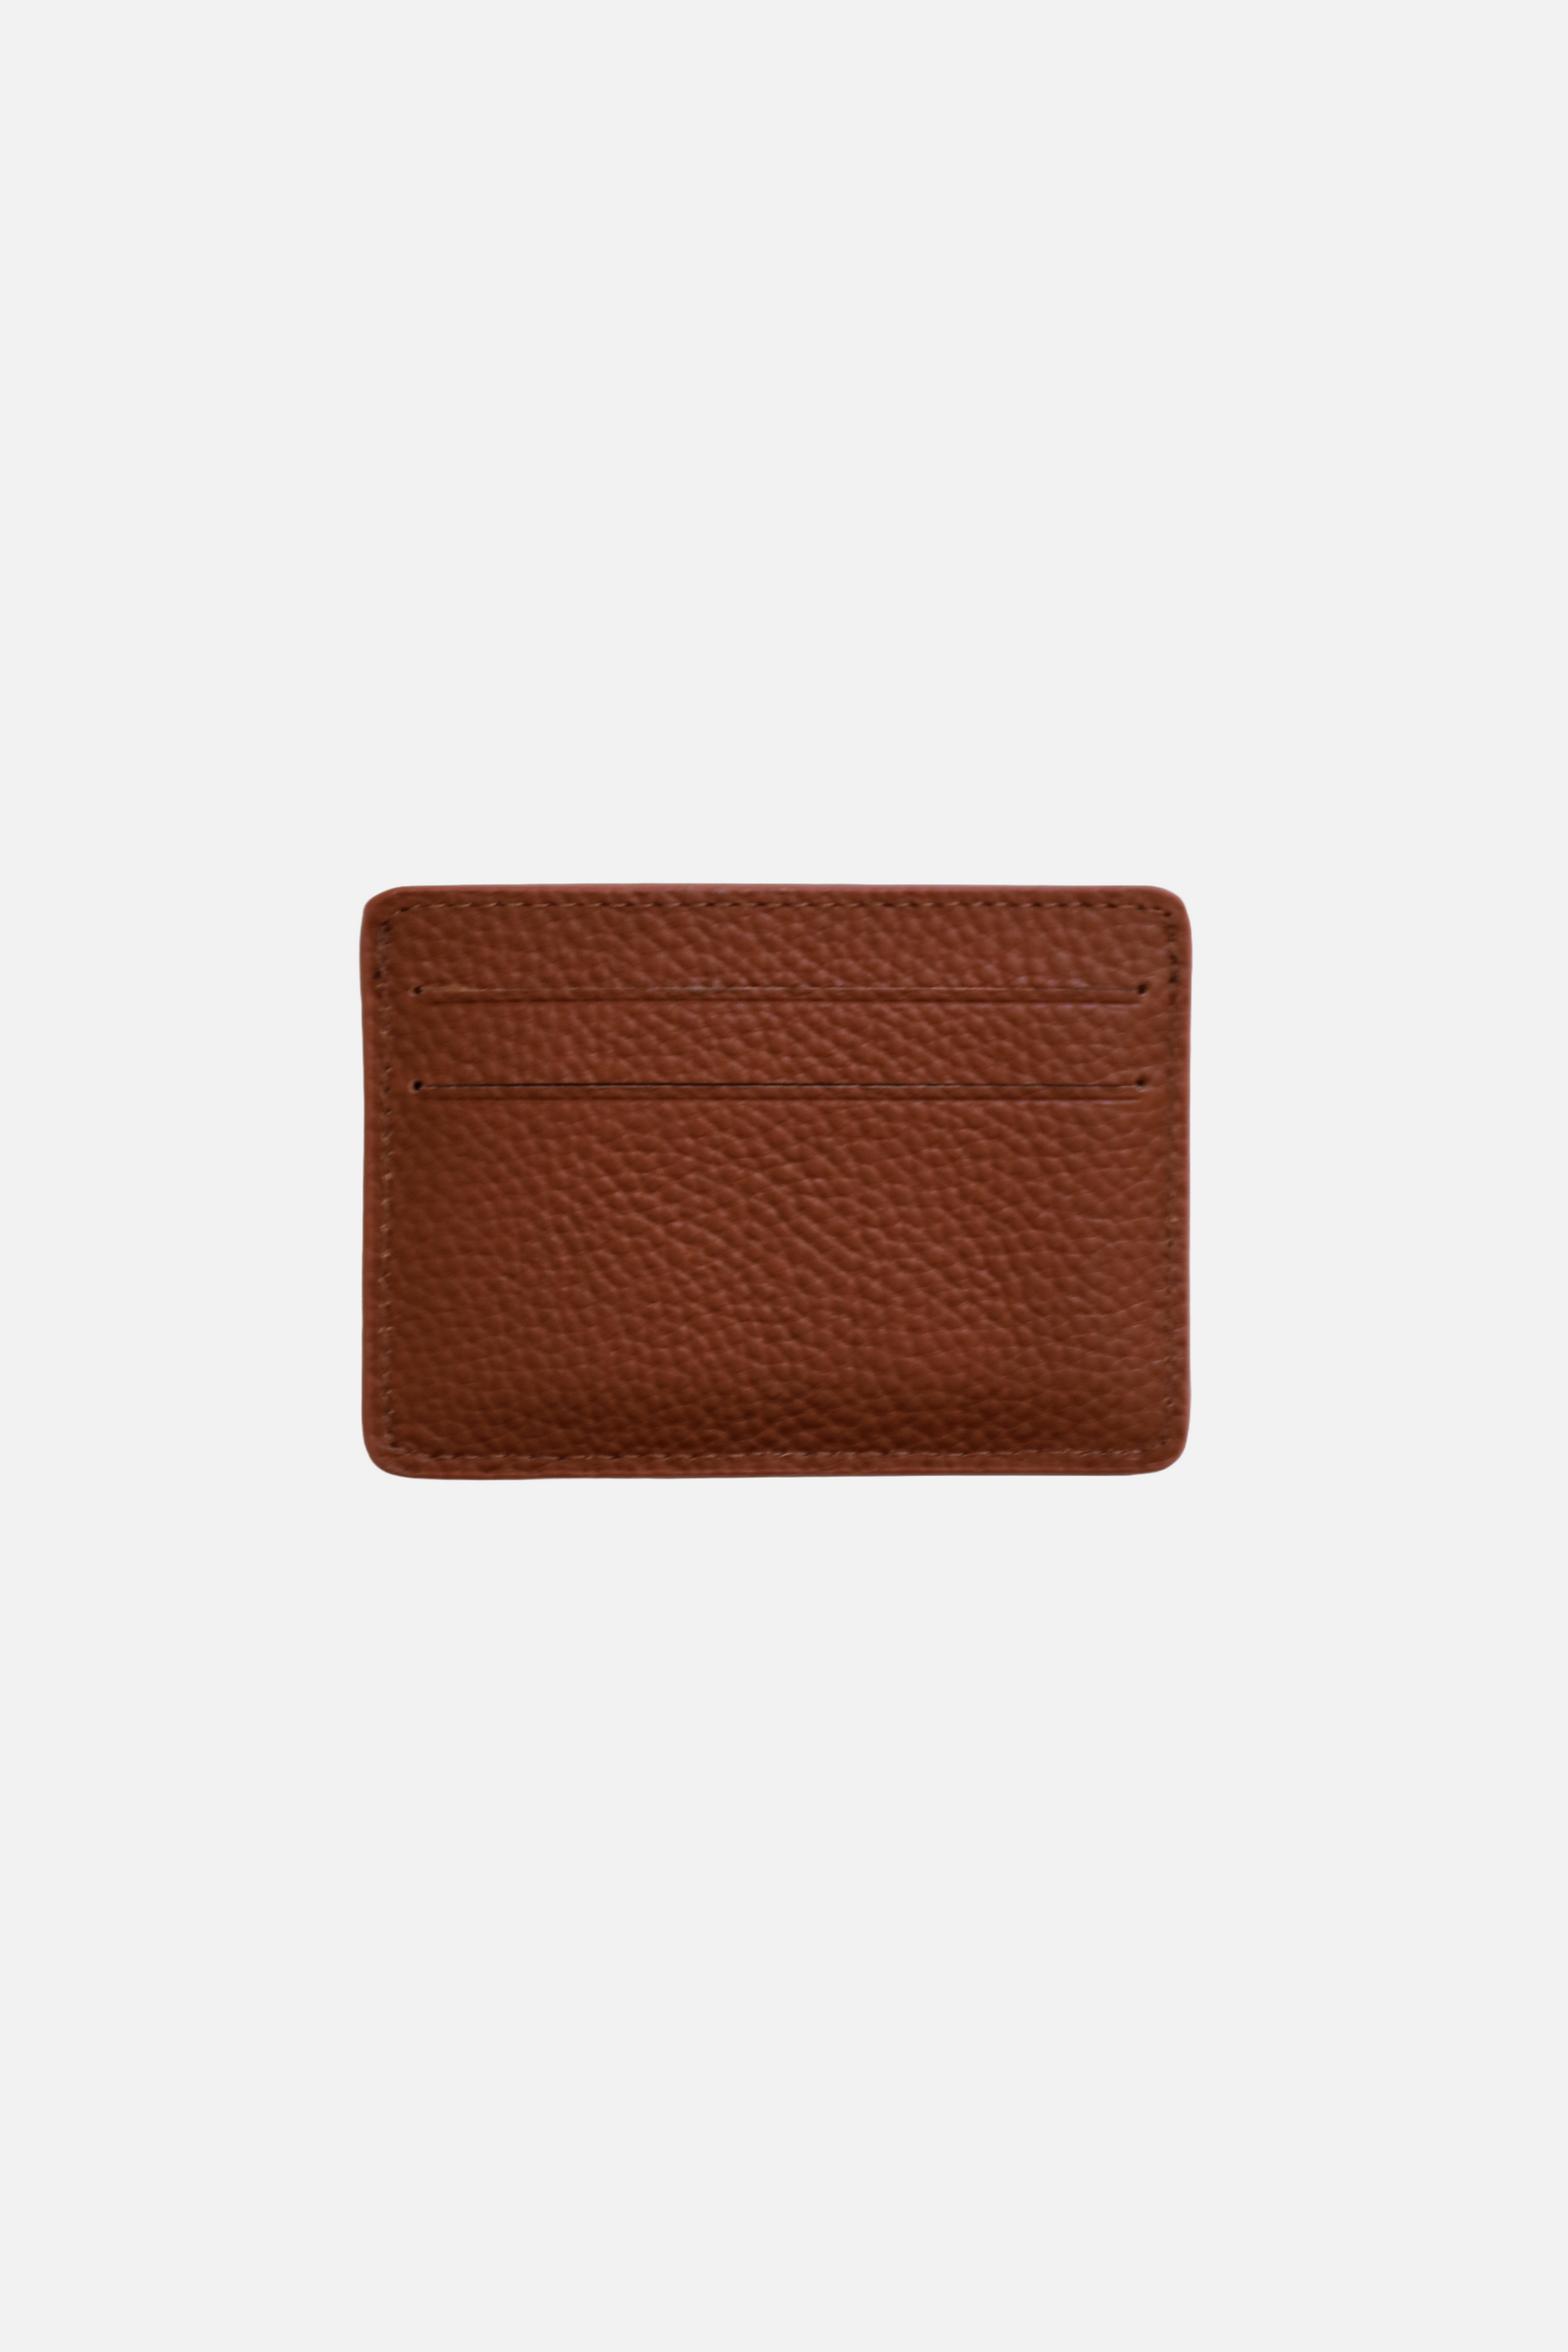 Leather Card Holder | Russet Tan